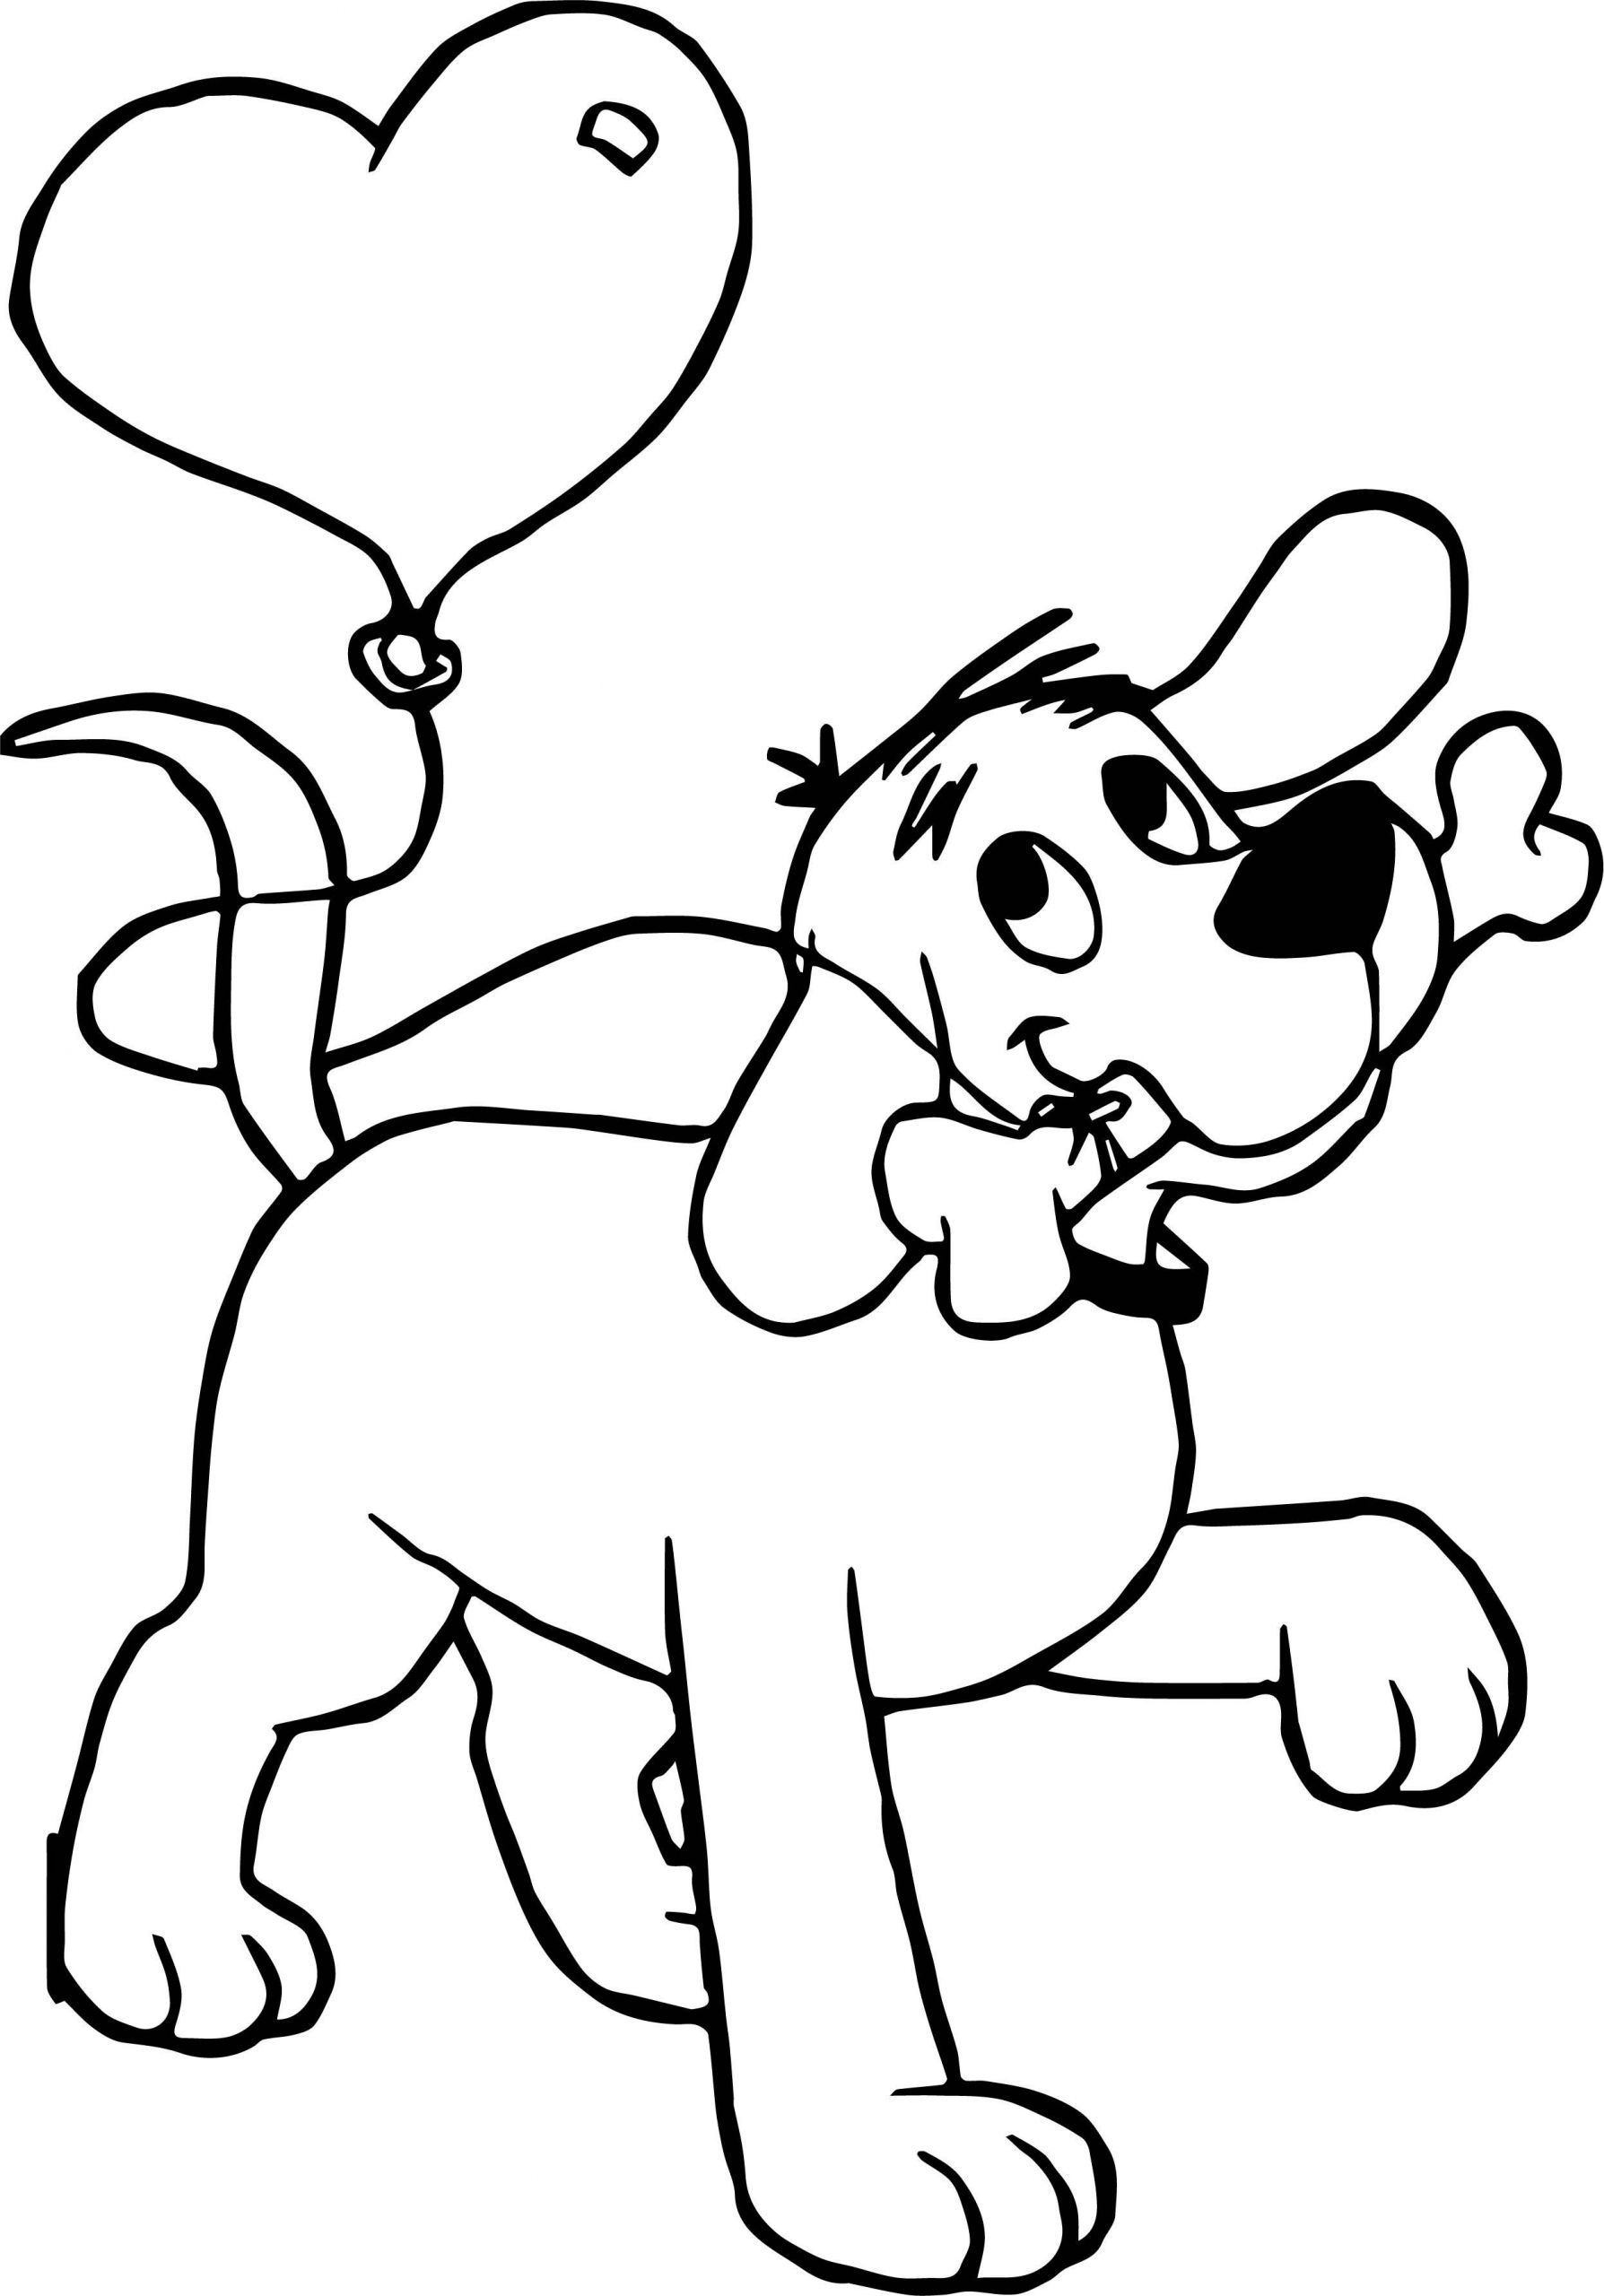 Dog Coloring Pages For Boys
 Heart Balloon Clifford the Big Red Dog Coloring Page